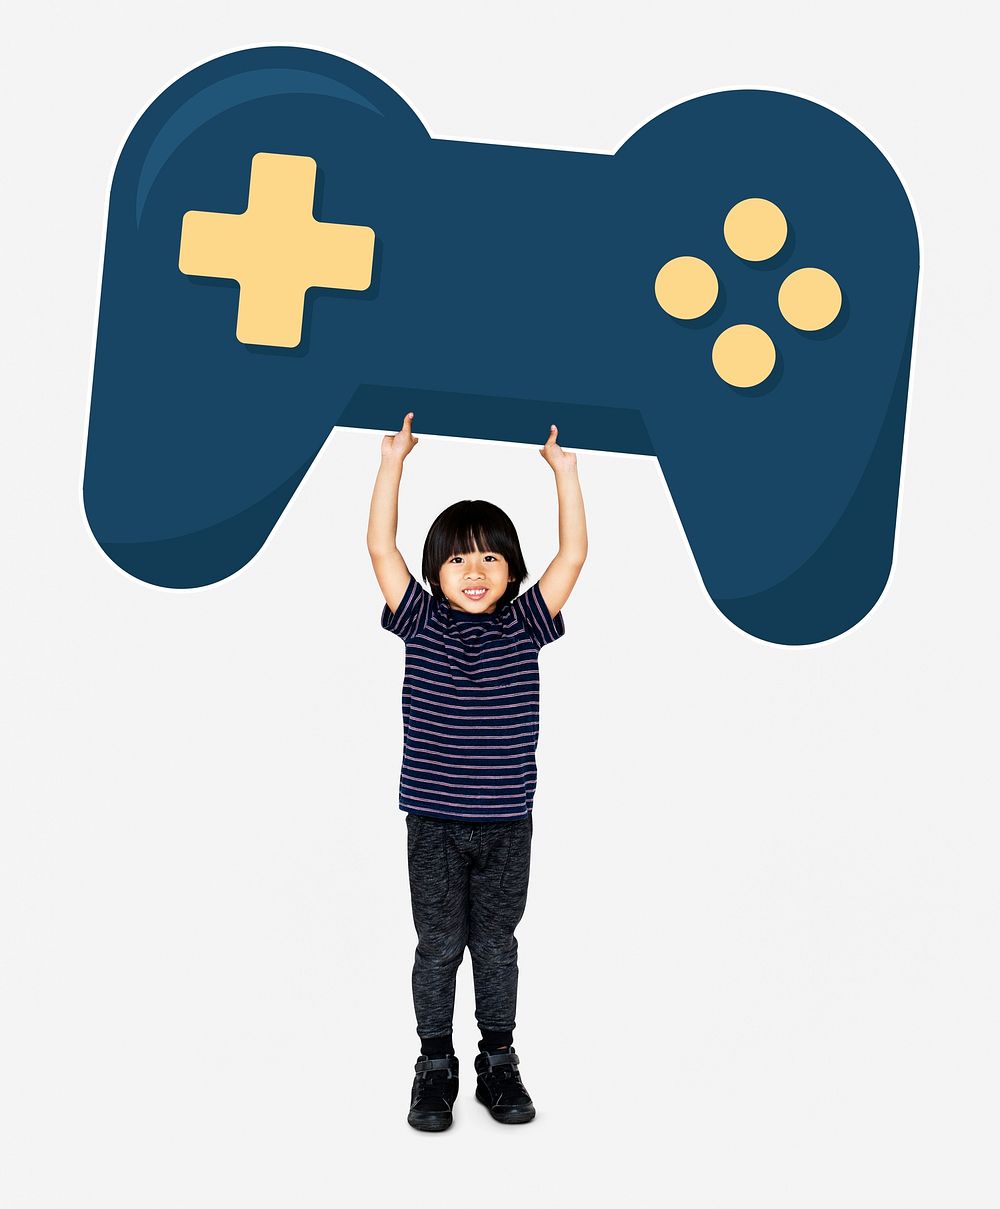 Little boy holding a game controller